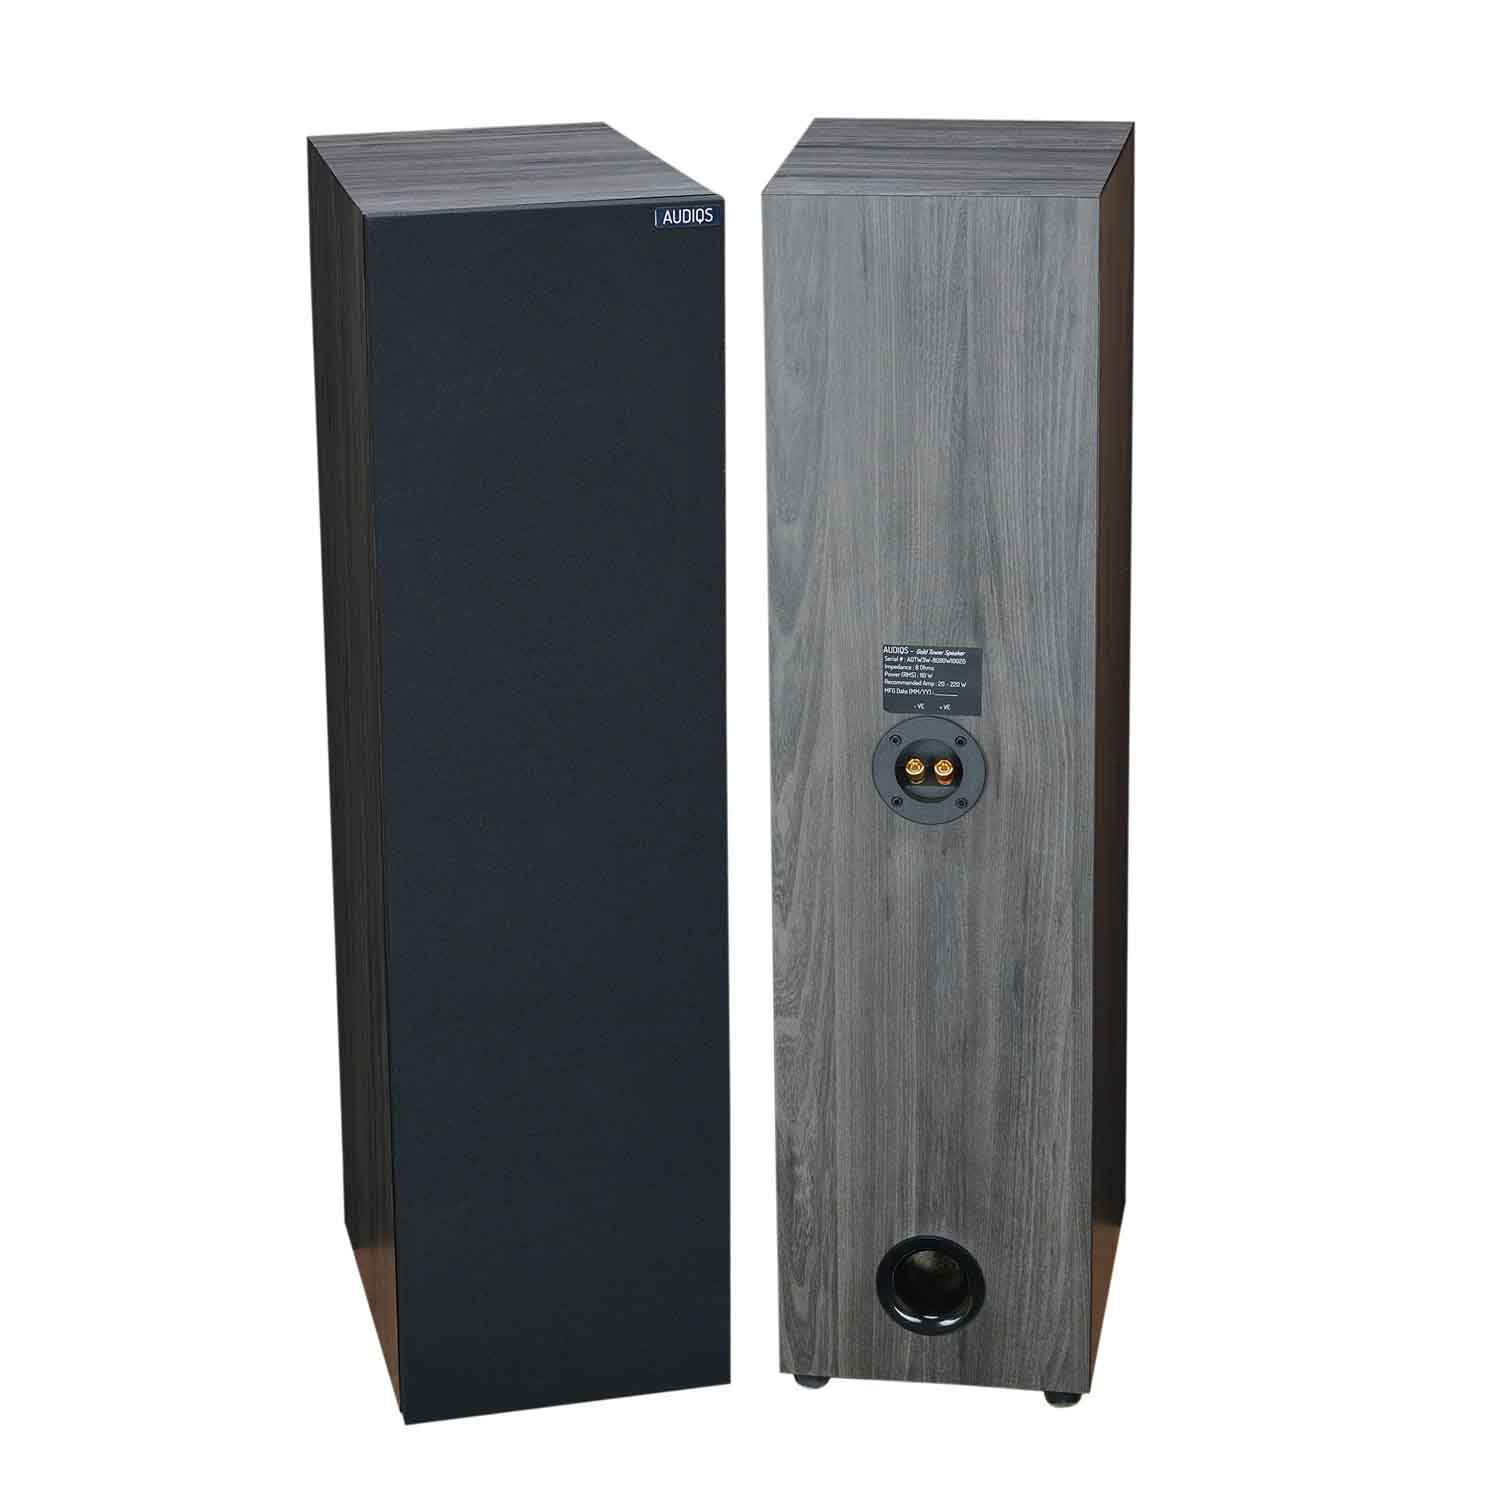 Gold Achal 3-Way Tower Speakers in Bangalore, India - INDIQAUDIO